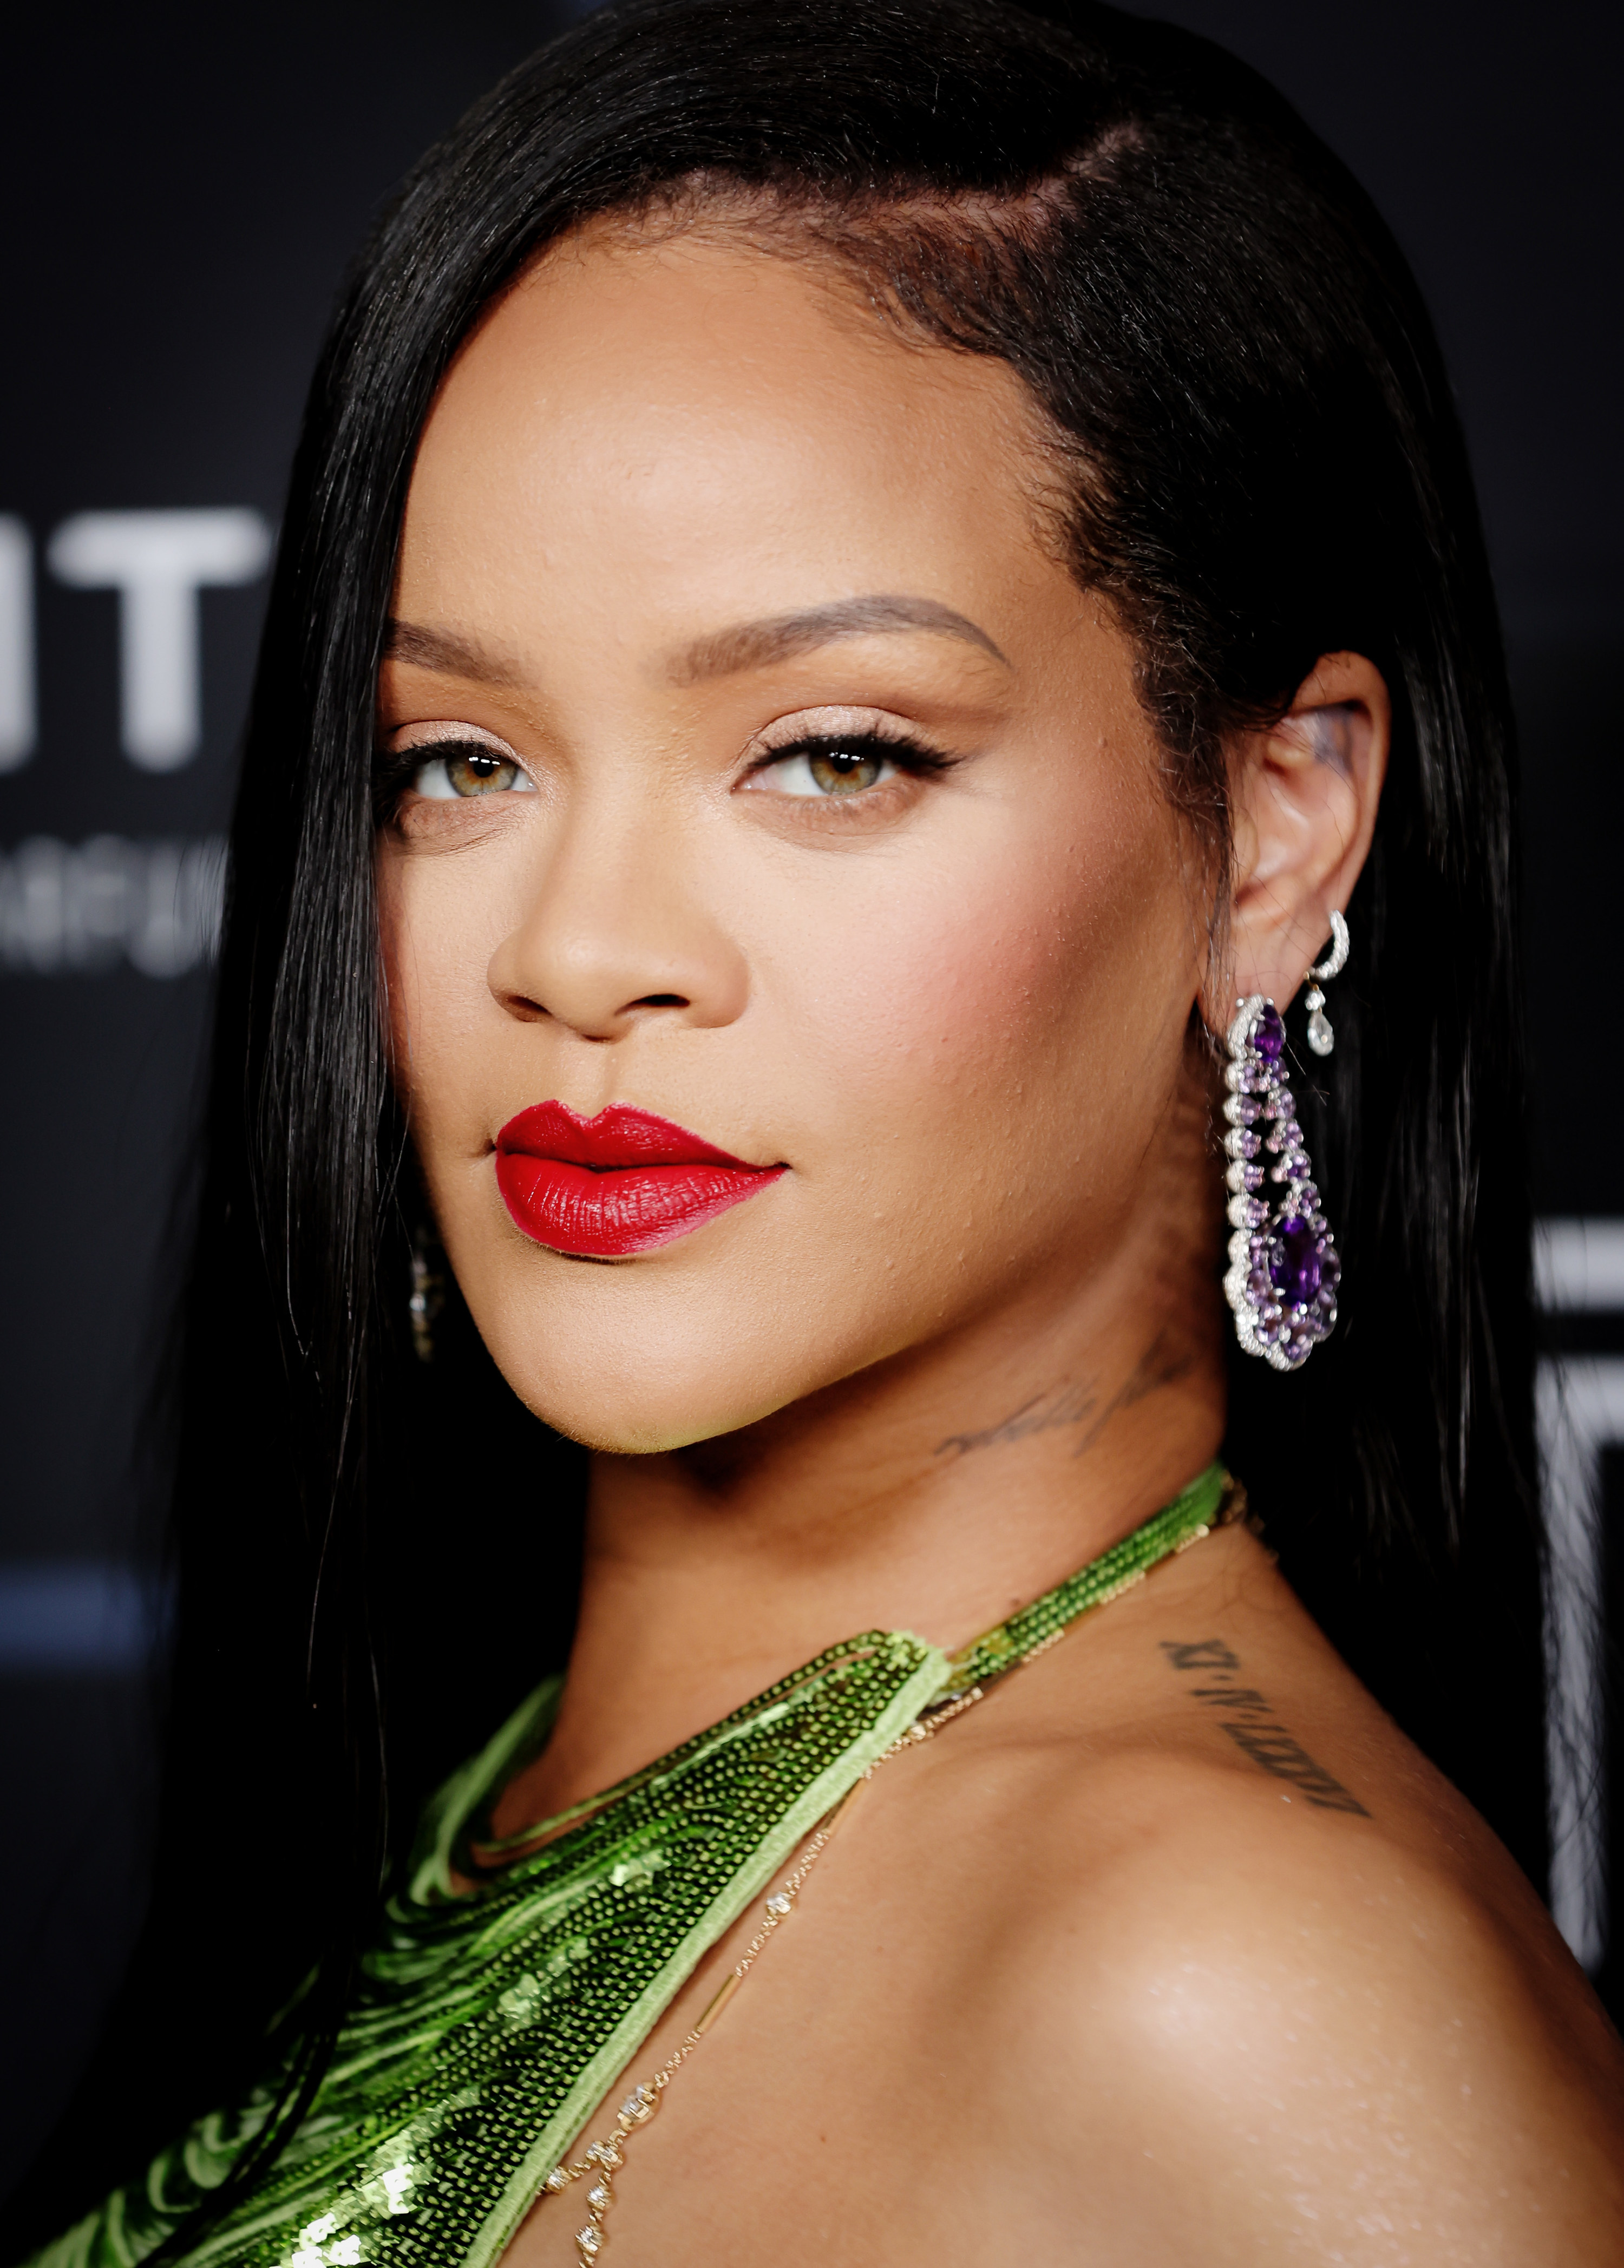 Rihanna smirking at the camera wearing bright red lipstick and a green dress